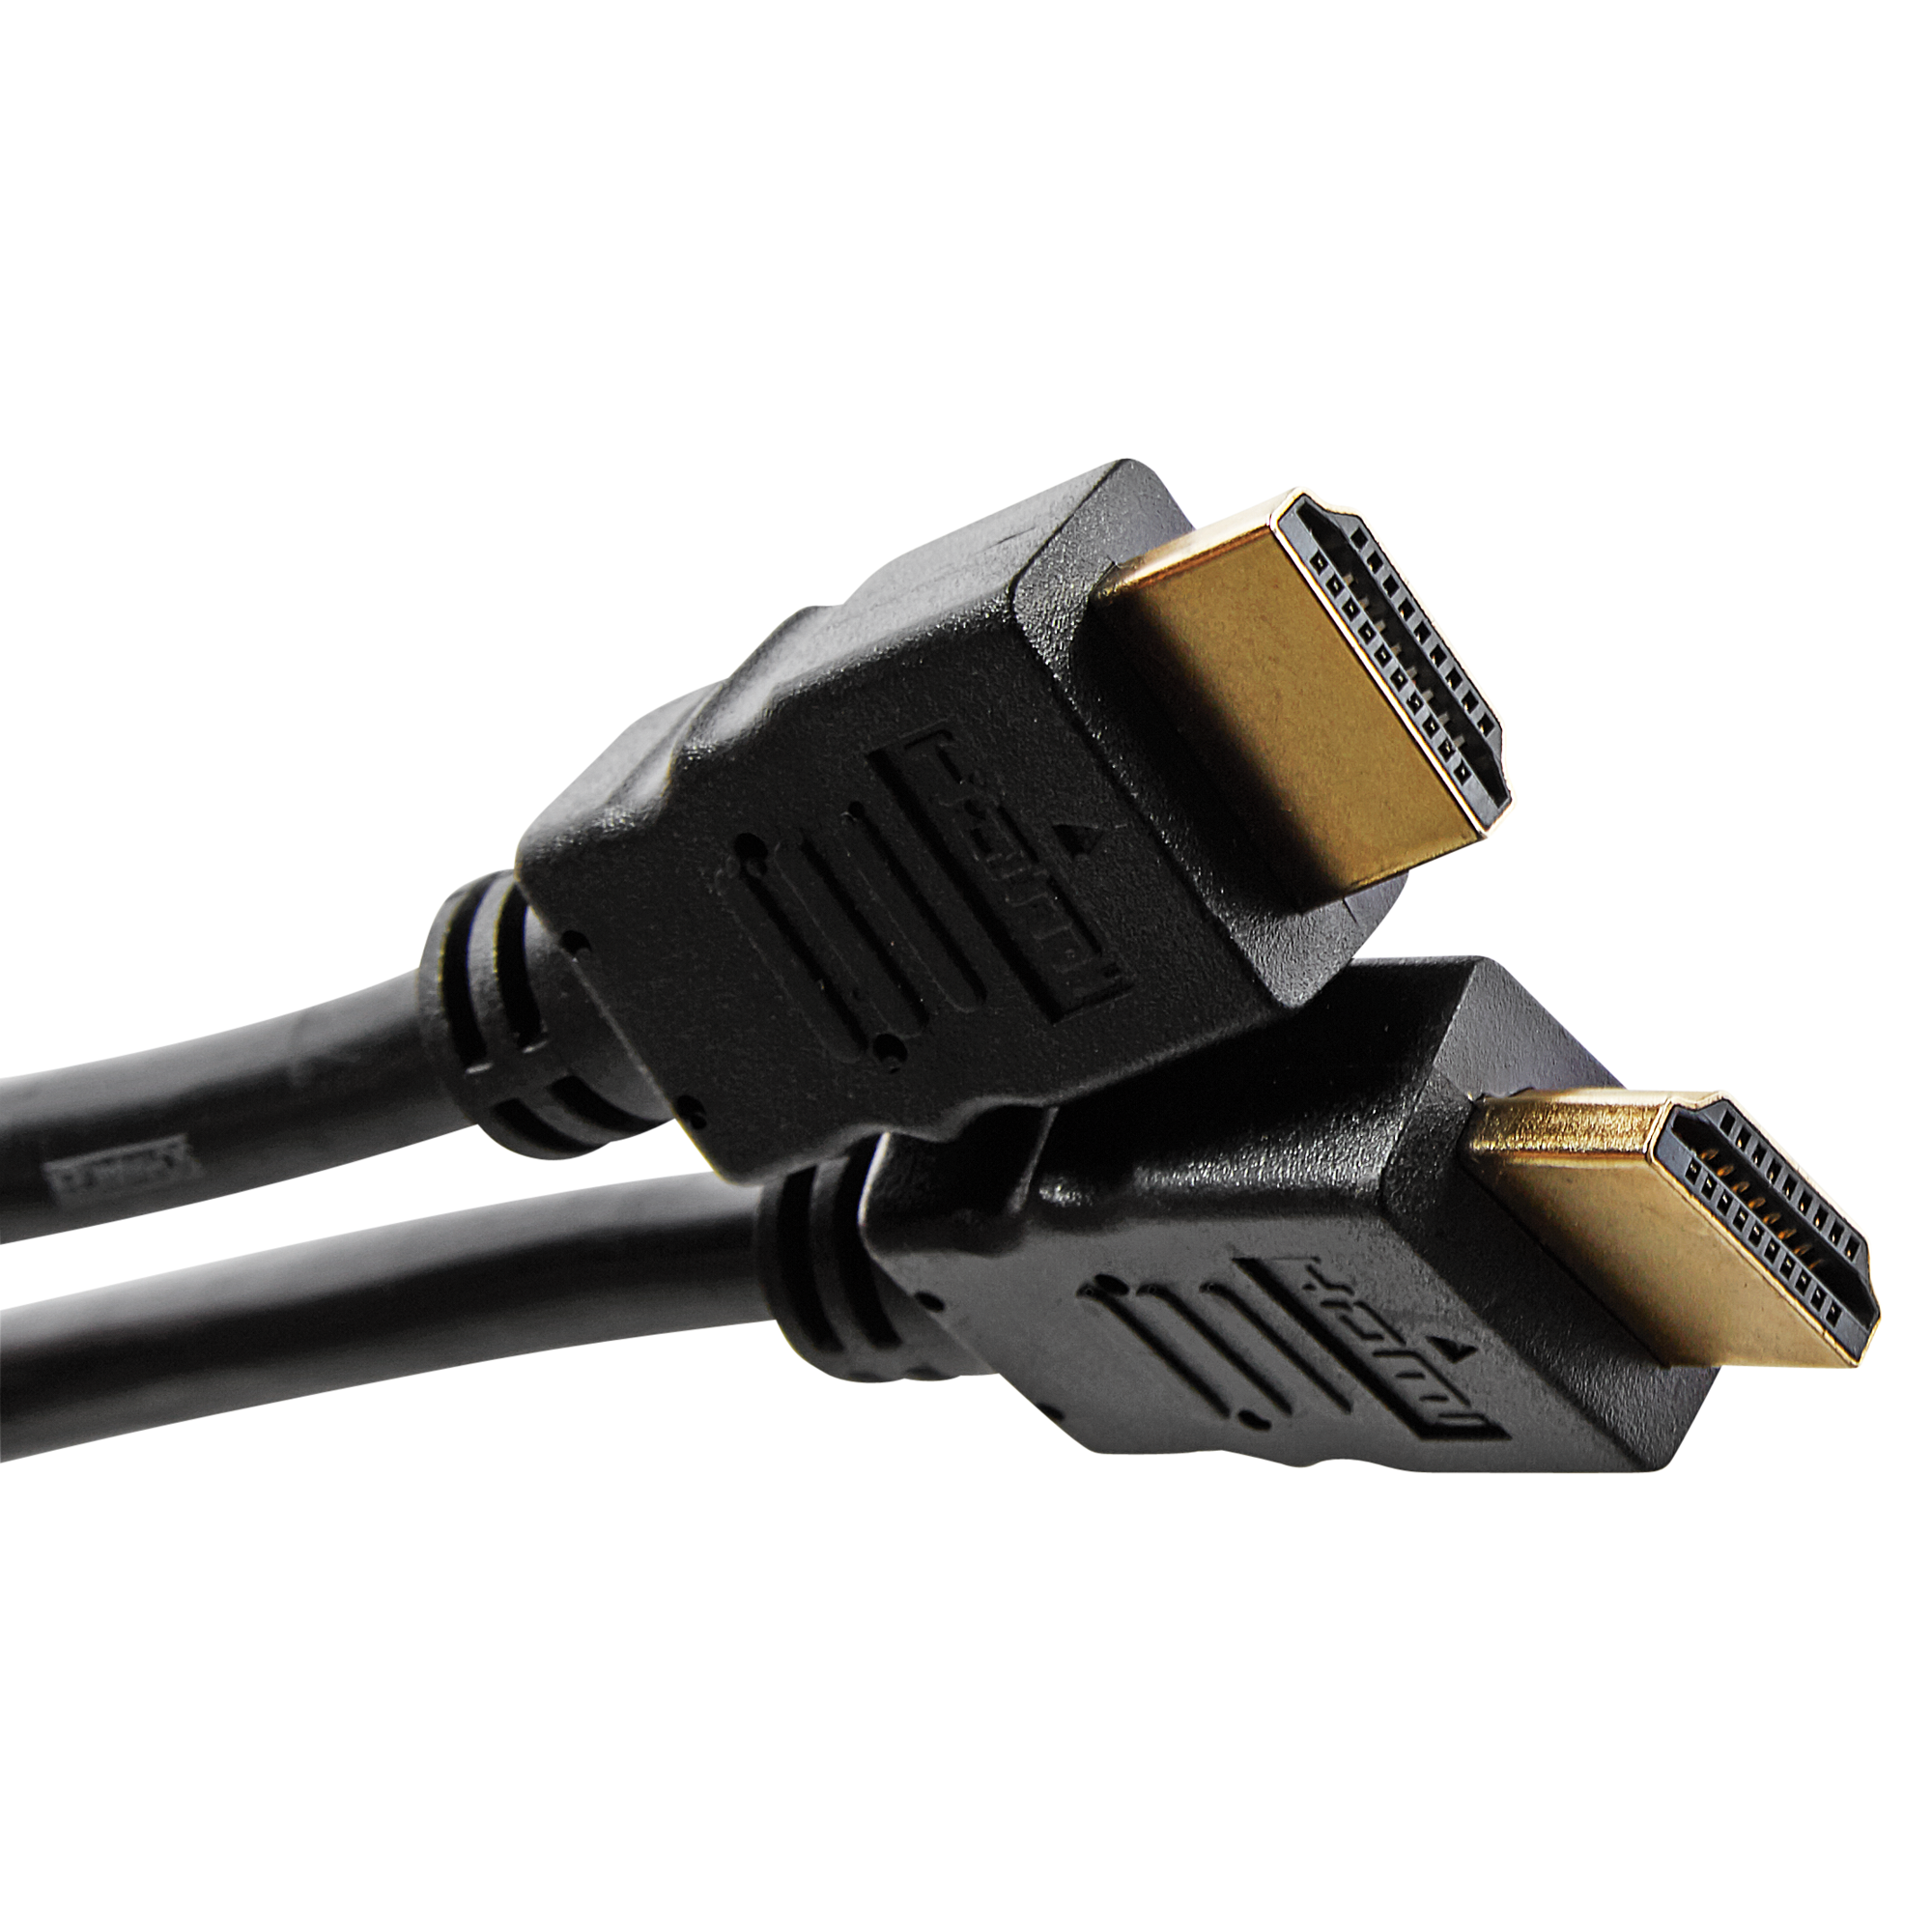 HDMI-Kabel schwarz 1,5 m + product picture